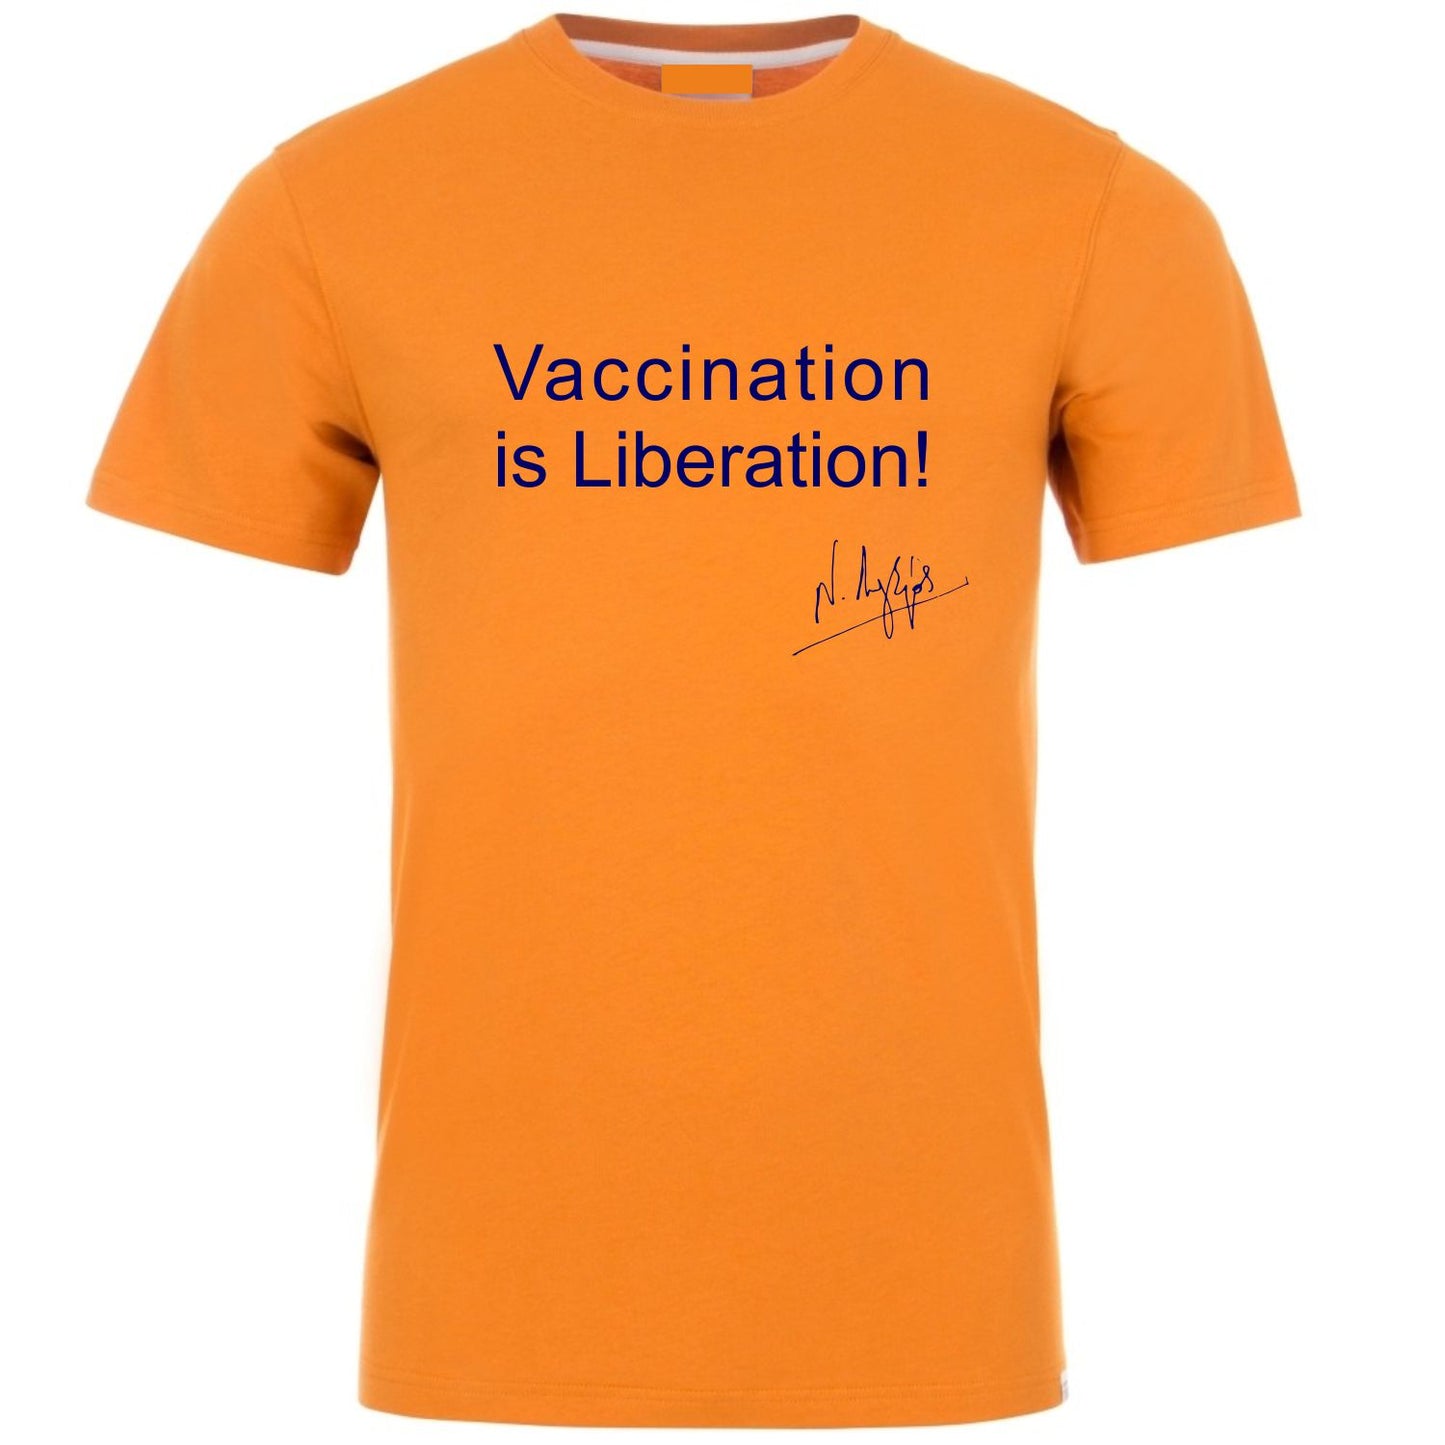 Vaccination is Liberation!